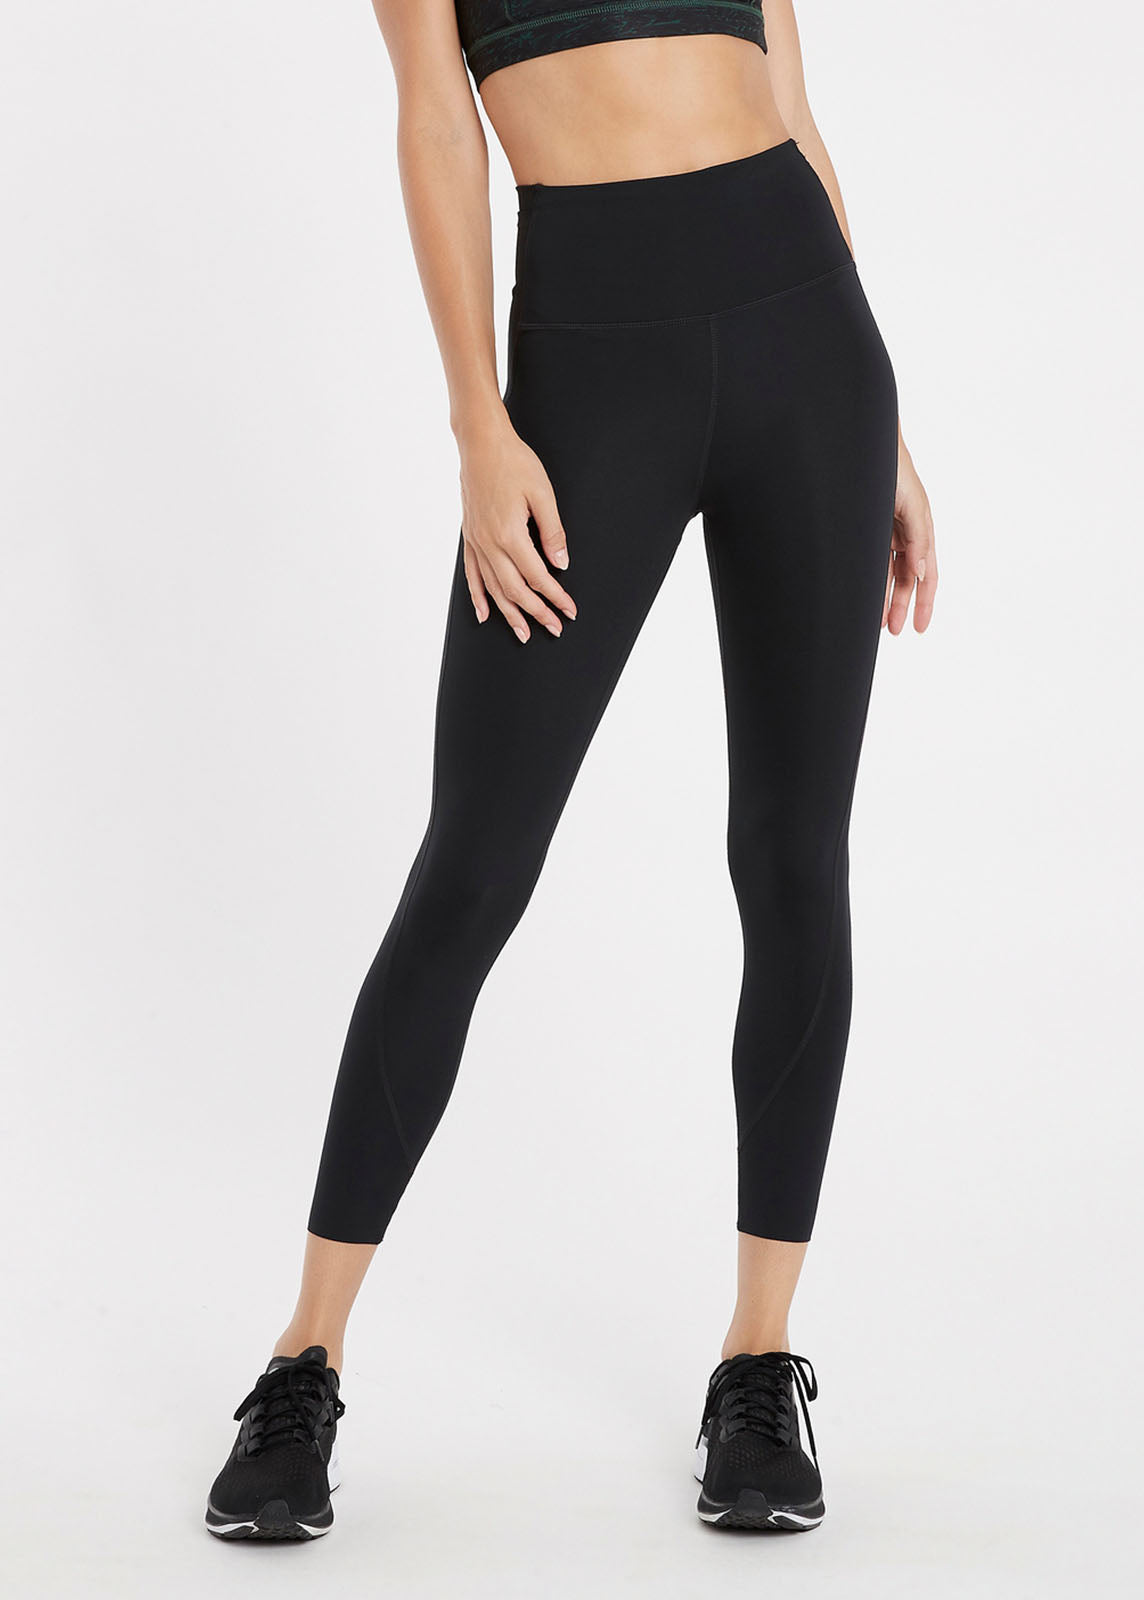 LEGGINGS WITH A DRAWCORD